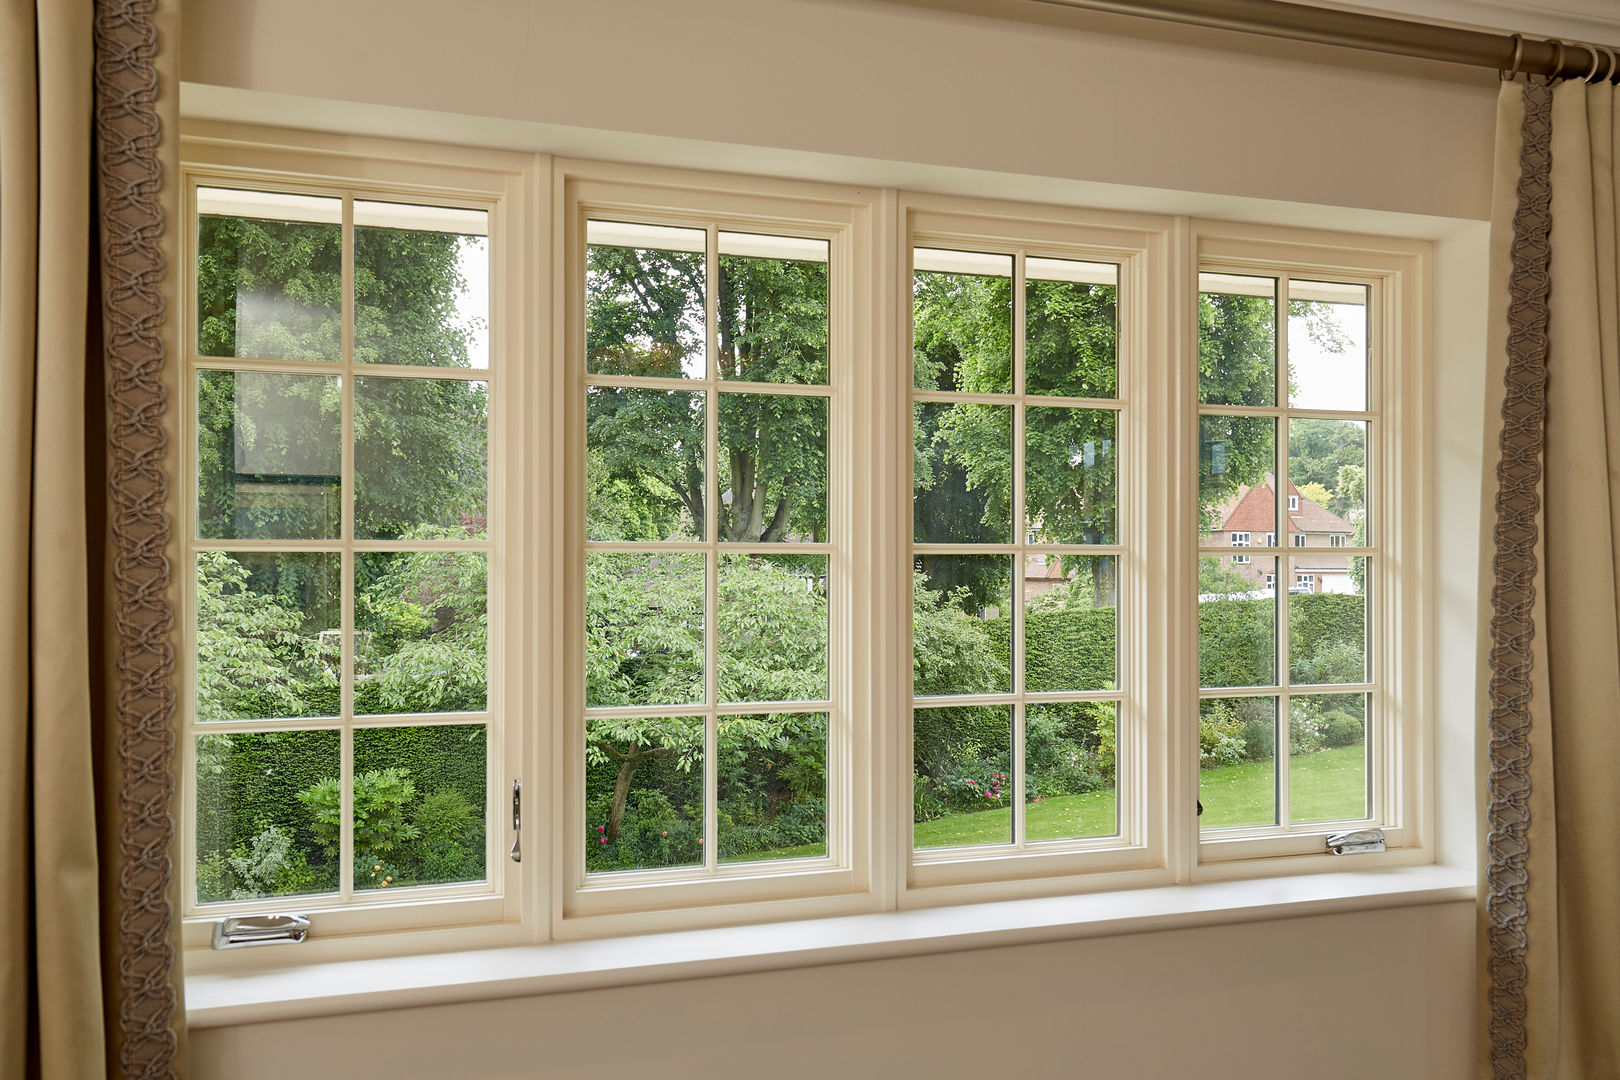 Marvin's Finely Crafted Aluminium Clad Wood Casement Windows With French Vanilla Interior Finish Marvin Windows and Doors UK Modern windows & doors Wood Wood effect